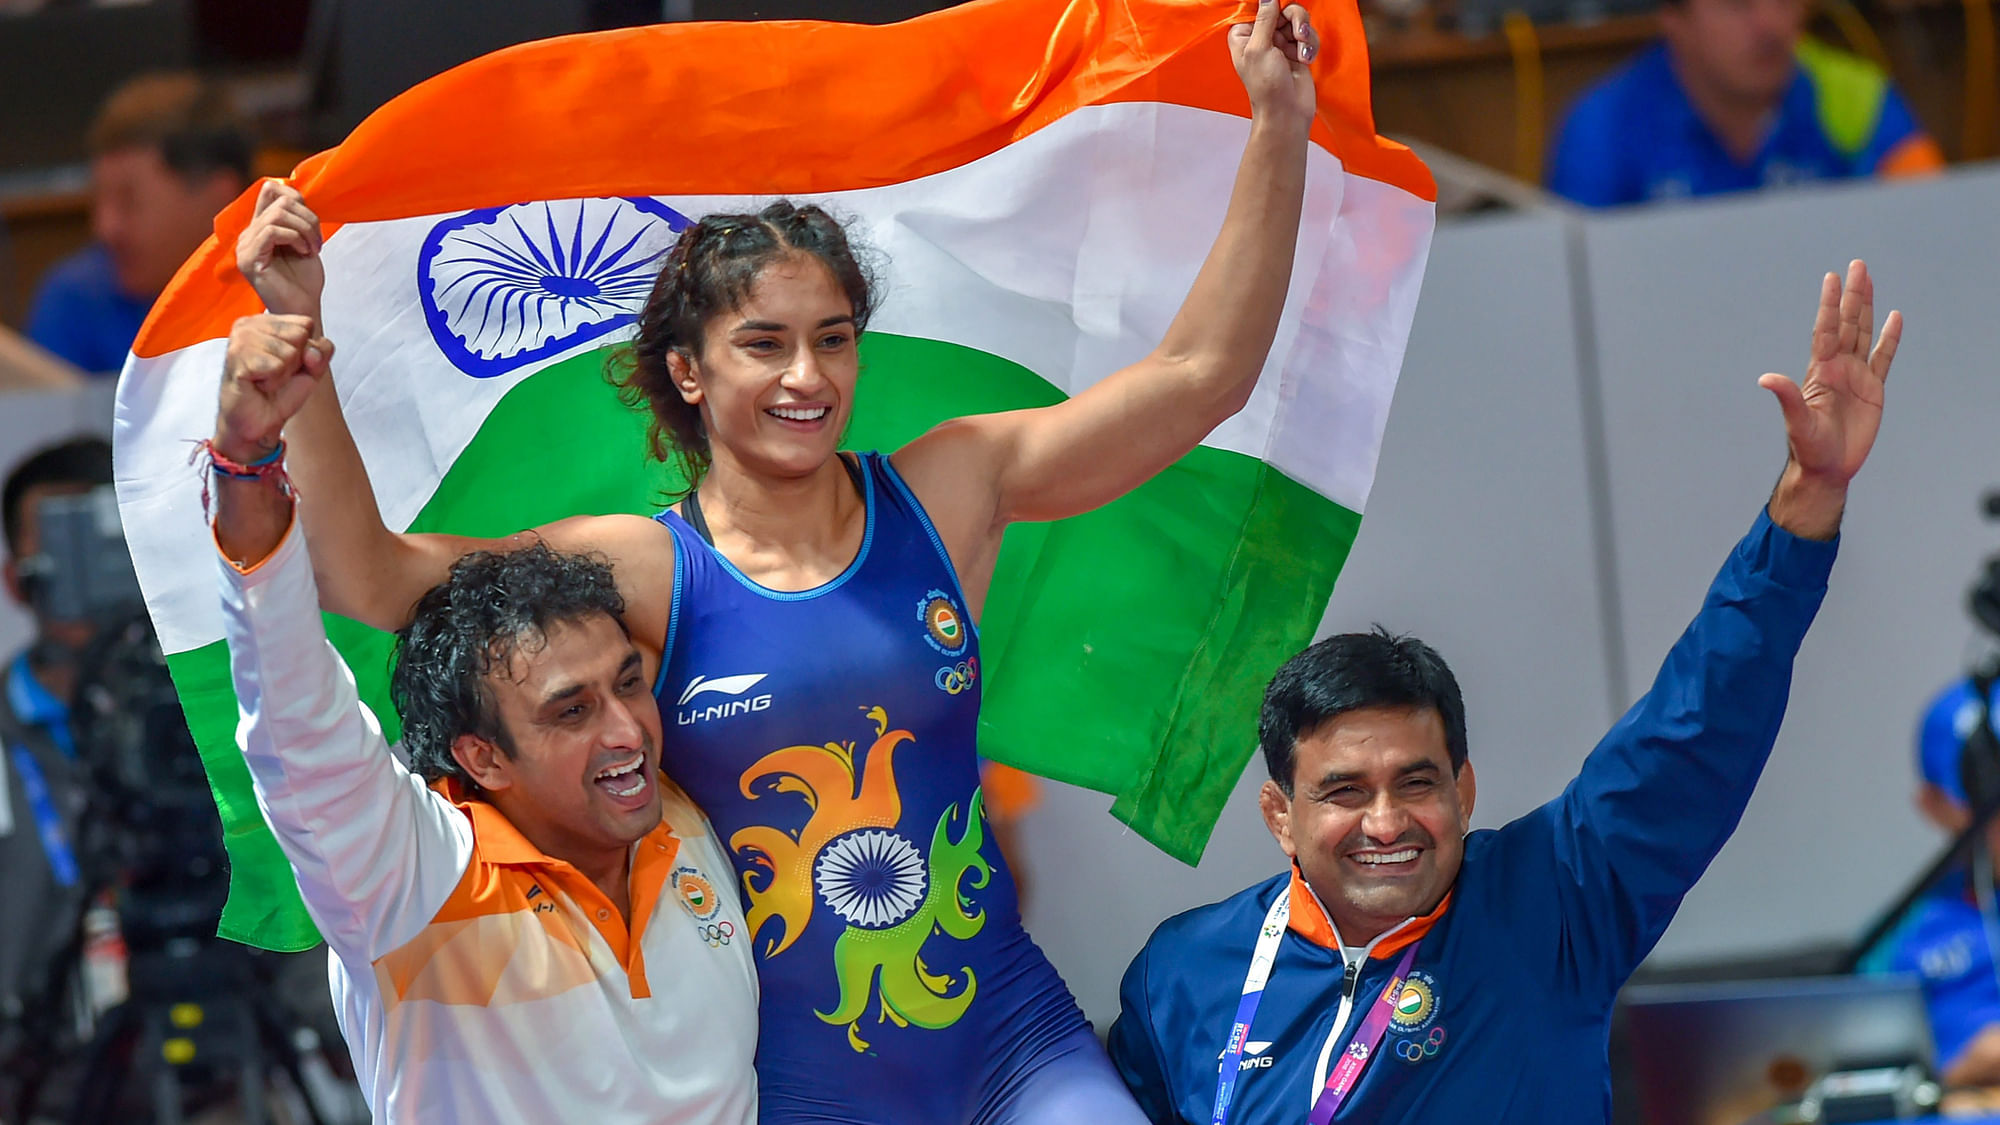 Jakarta: India’s Vinesh Phogat celebrates with the Tricolour after winning the Gold medal in women’s freestyle 50 kg wrestling at the Asian Games 2018, in Jakarta on Monday, August 20, 2018.&nbsp;